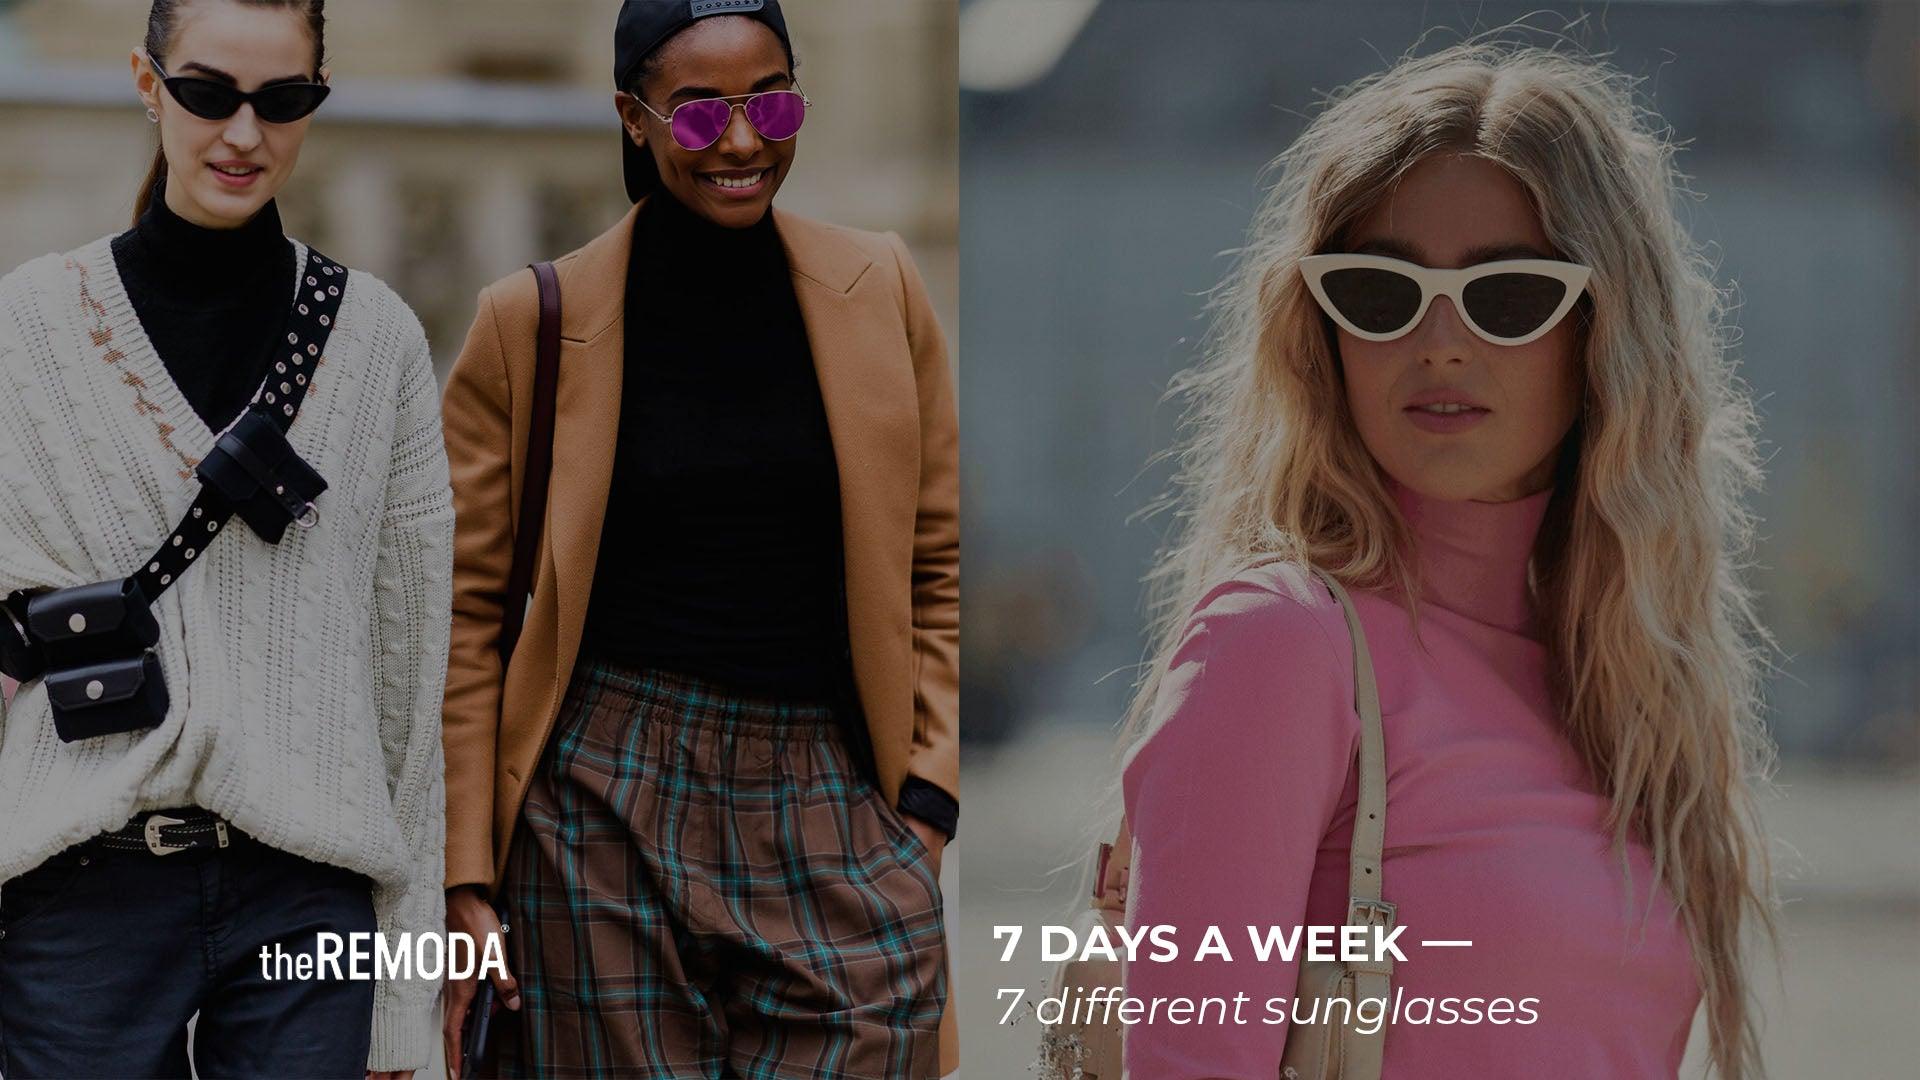 7 days a week — 7 different sunglasses - theREMODA